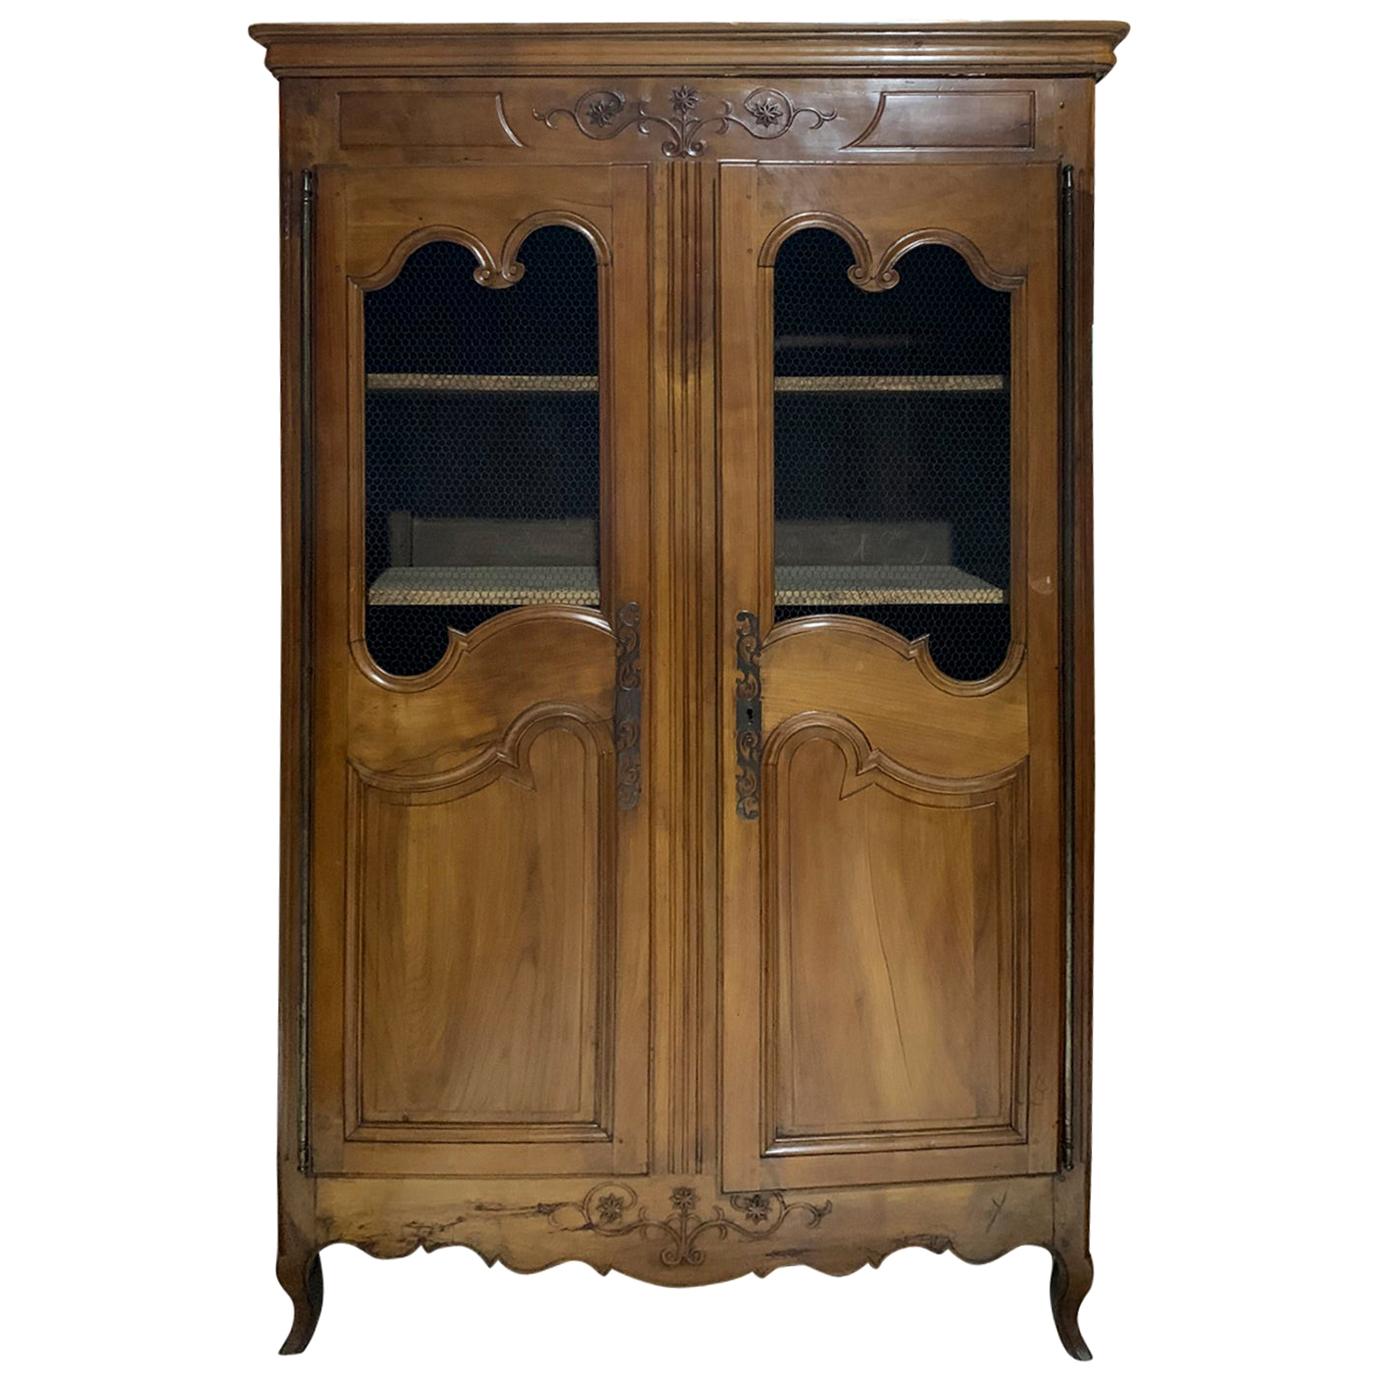 19th Century Fruitwood Armoire with Wire Doors